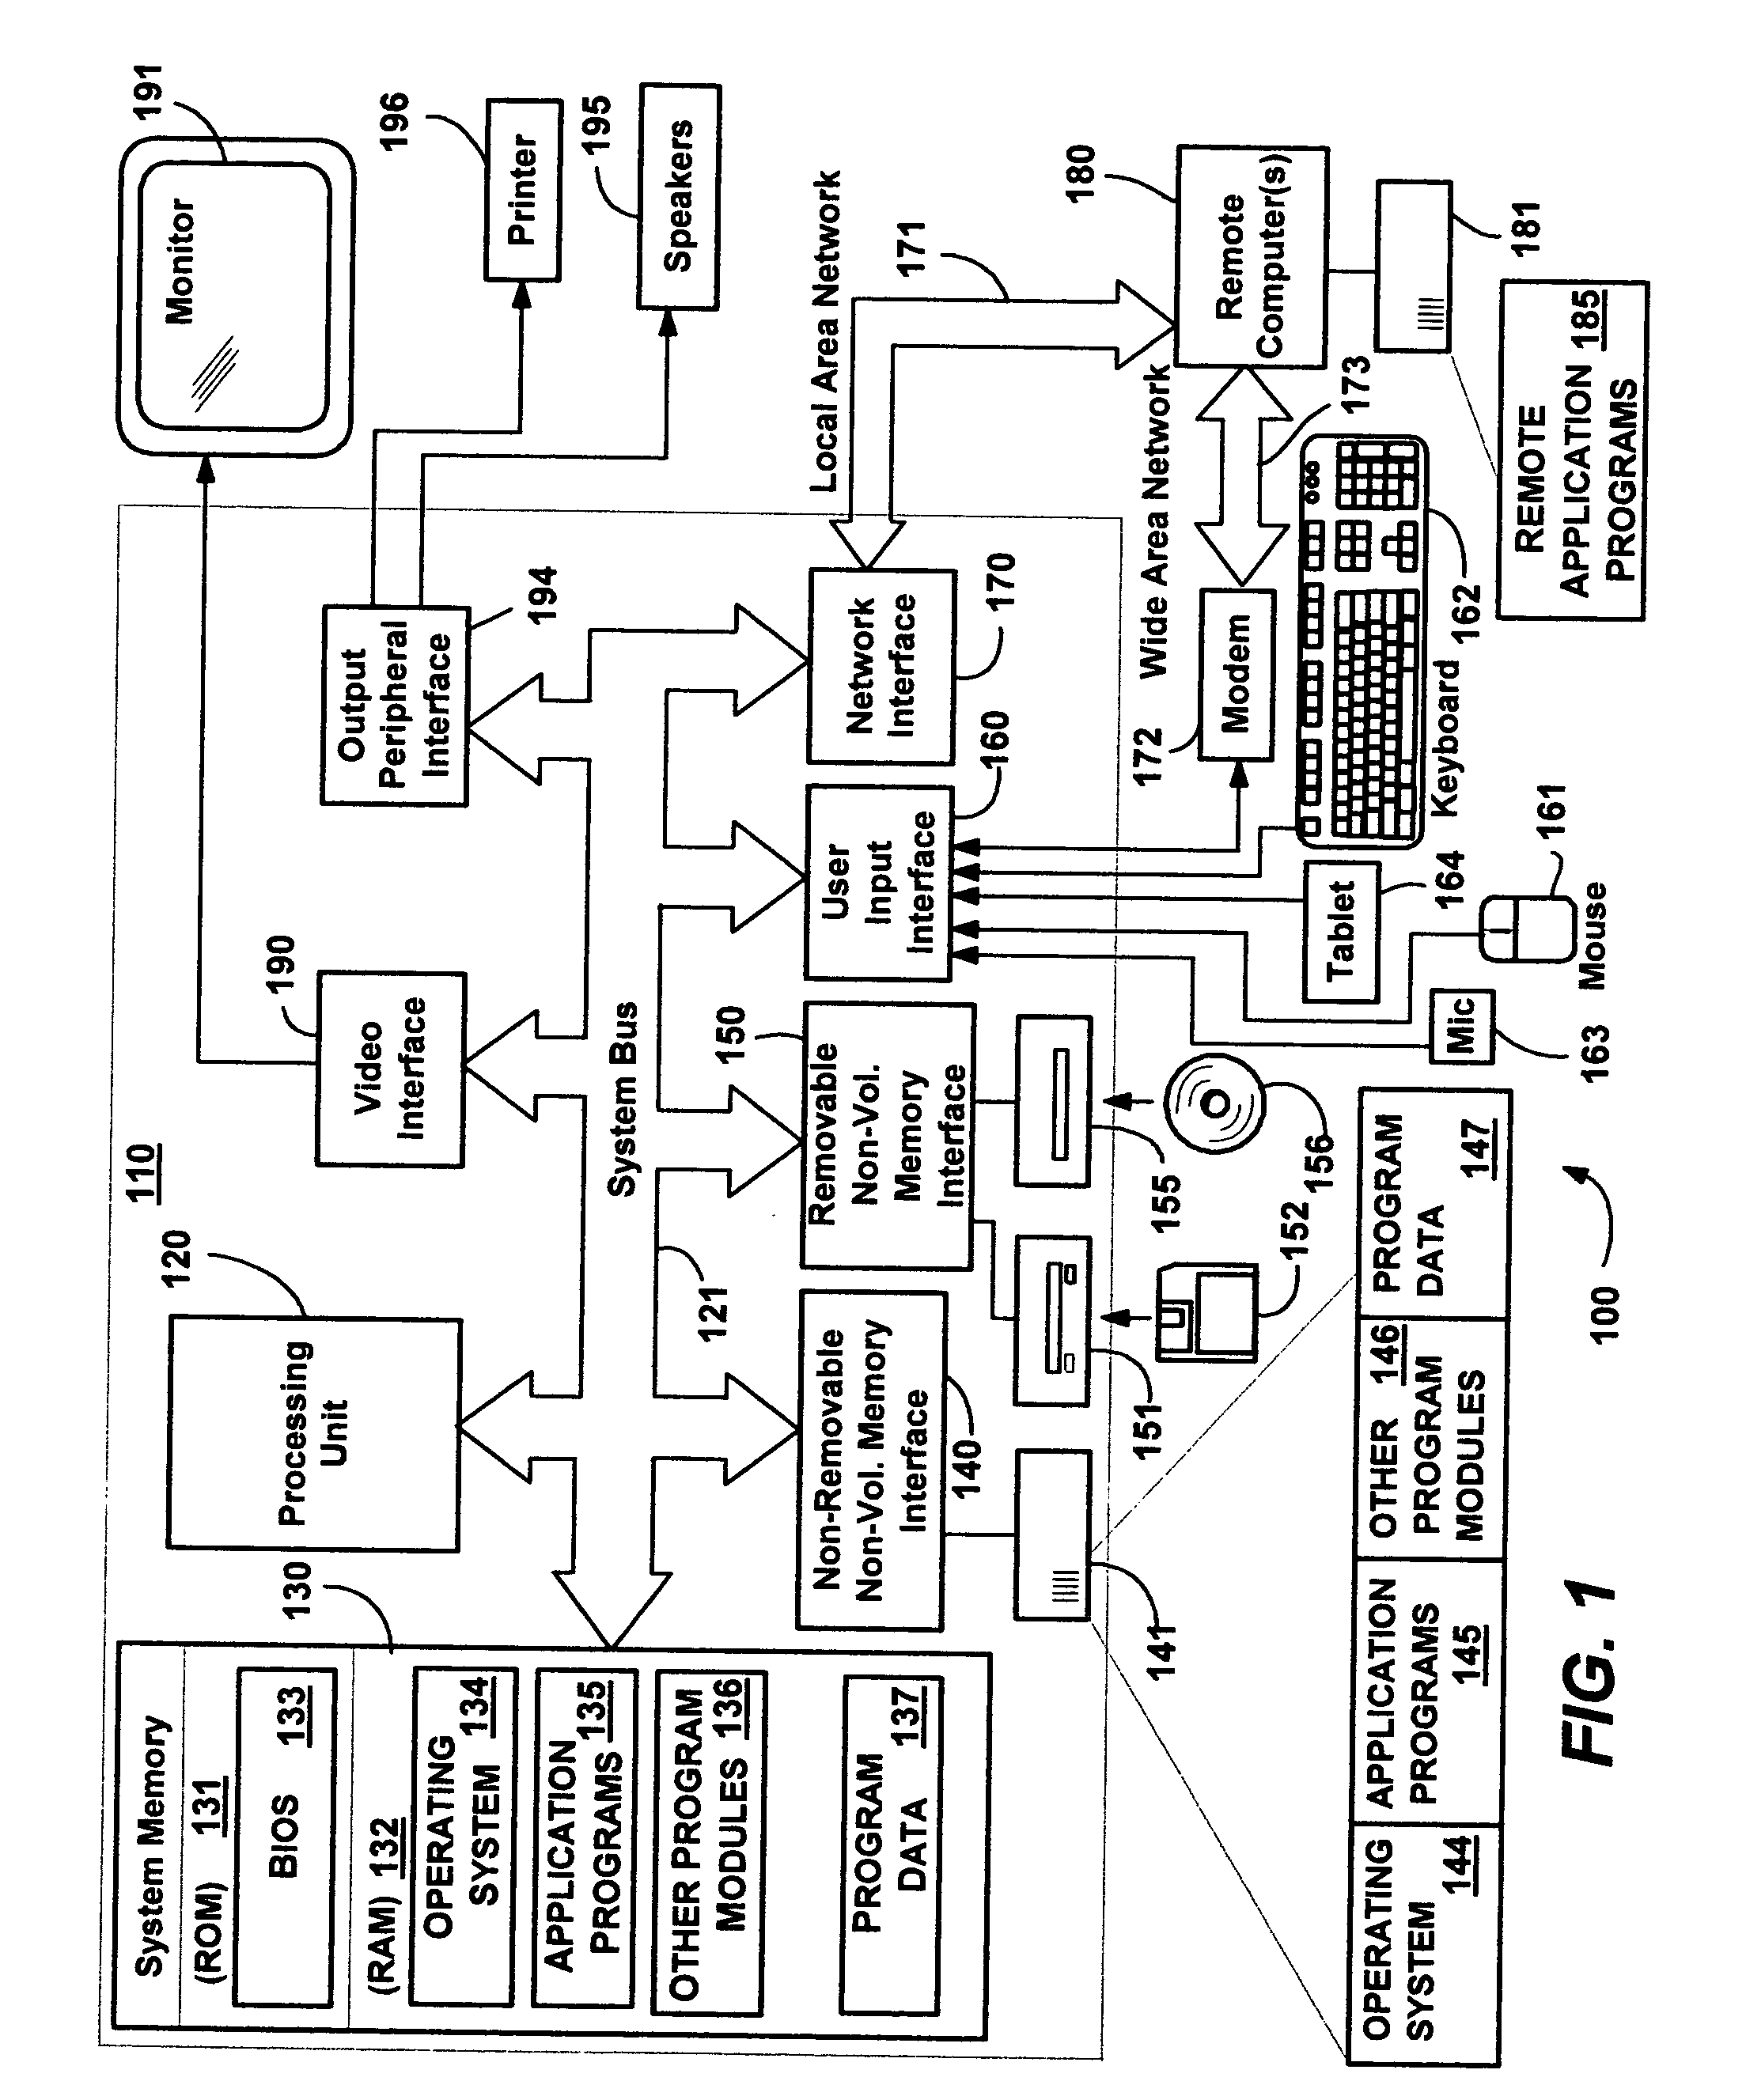 System and method for reporting hierarchically arranged data in markup language formats